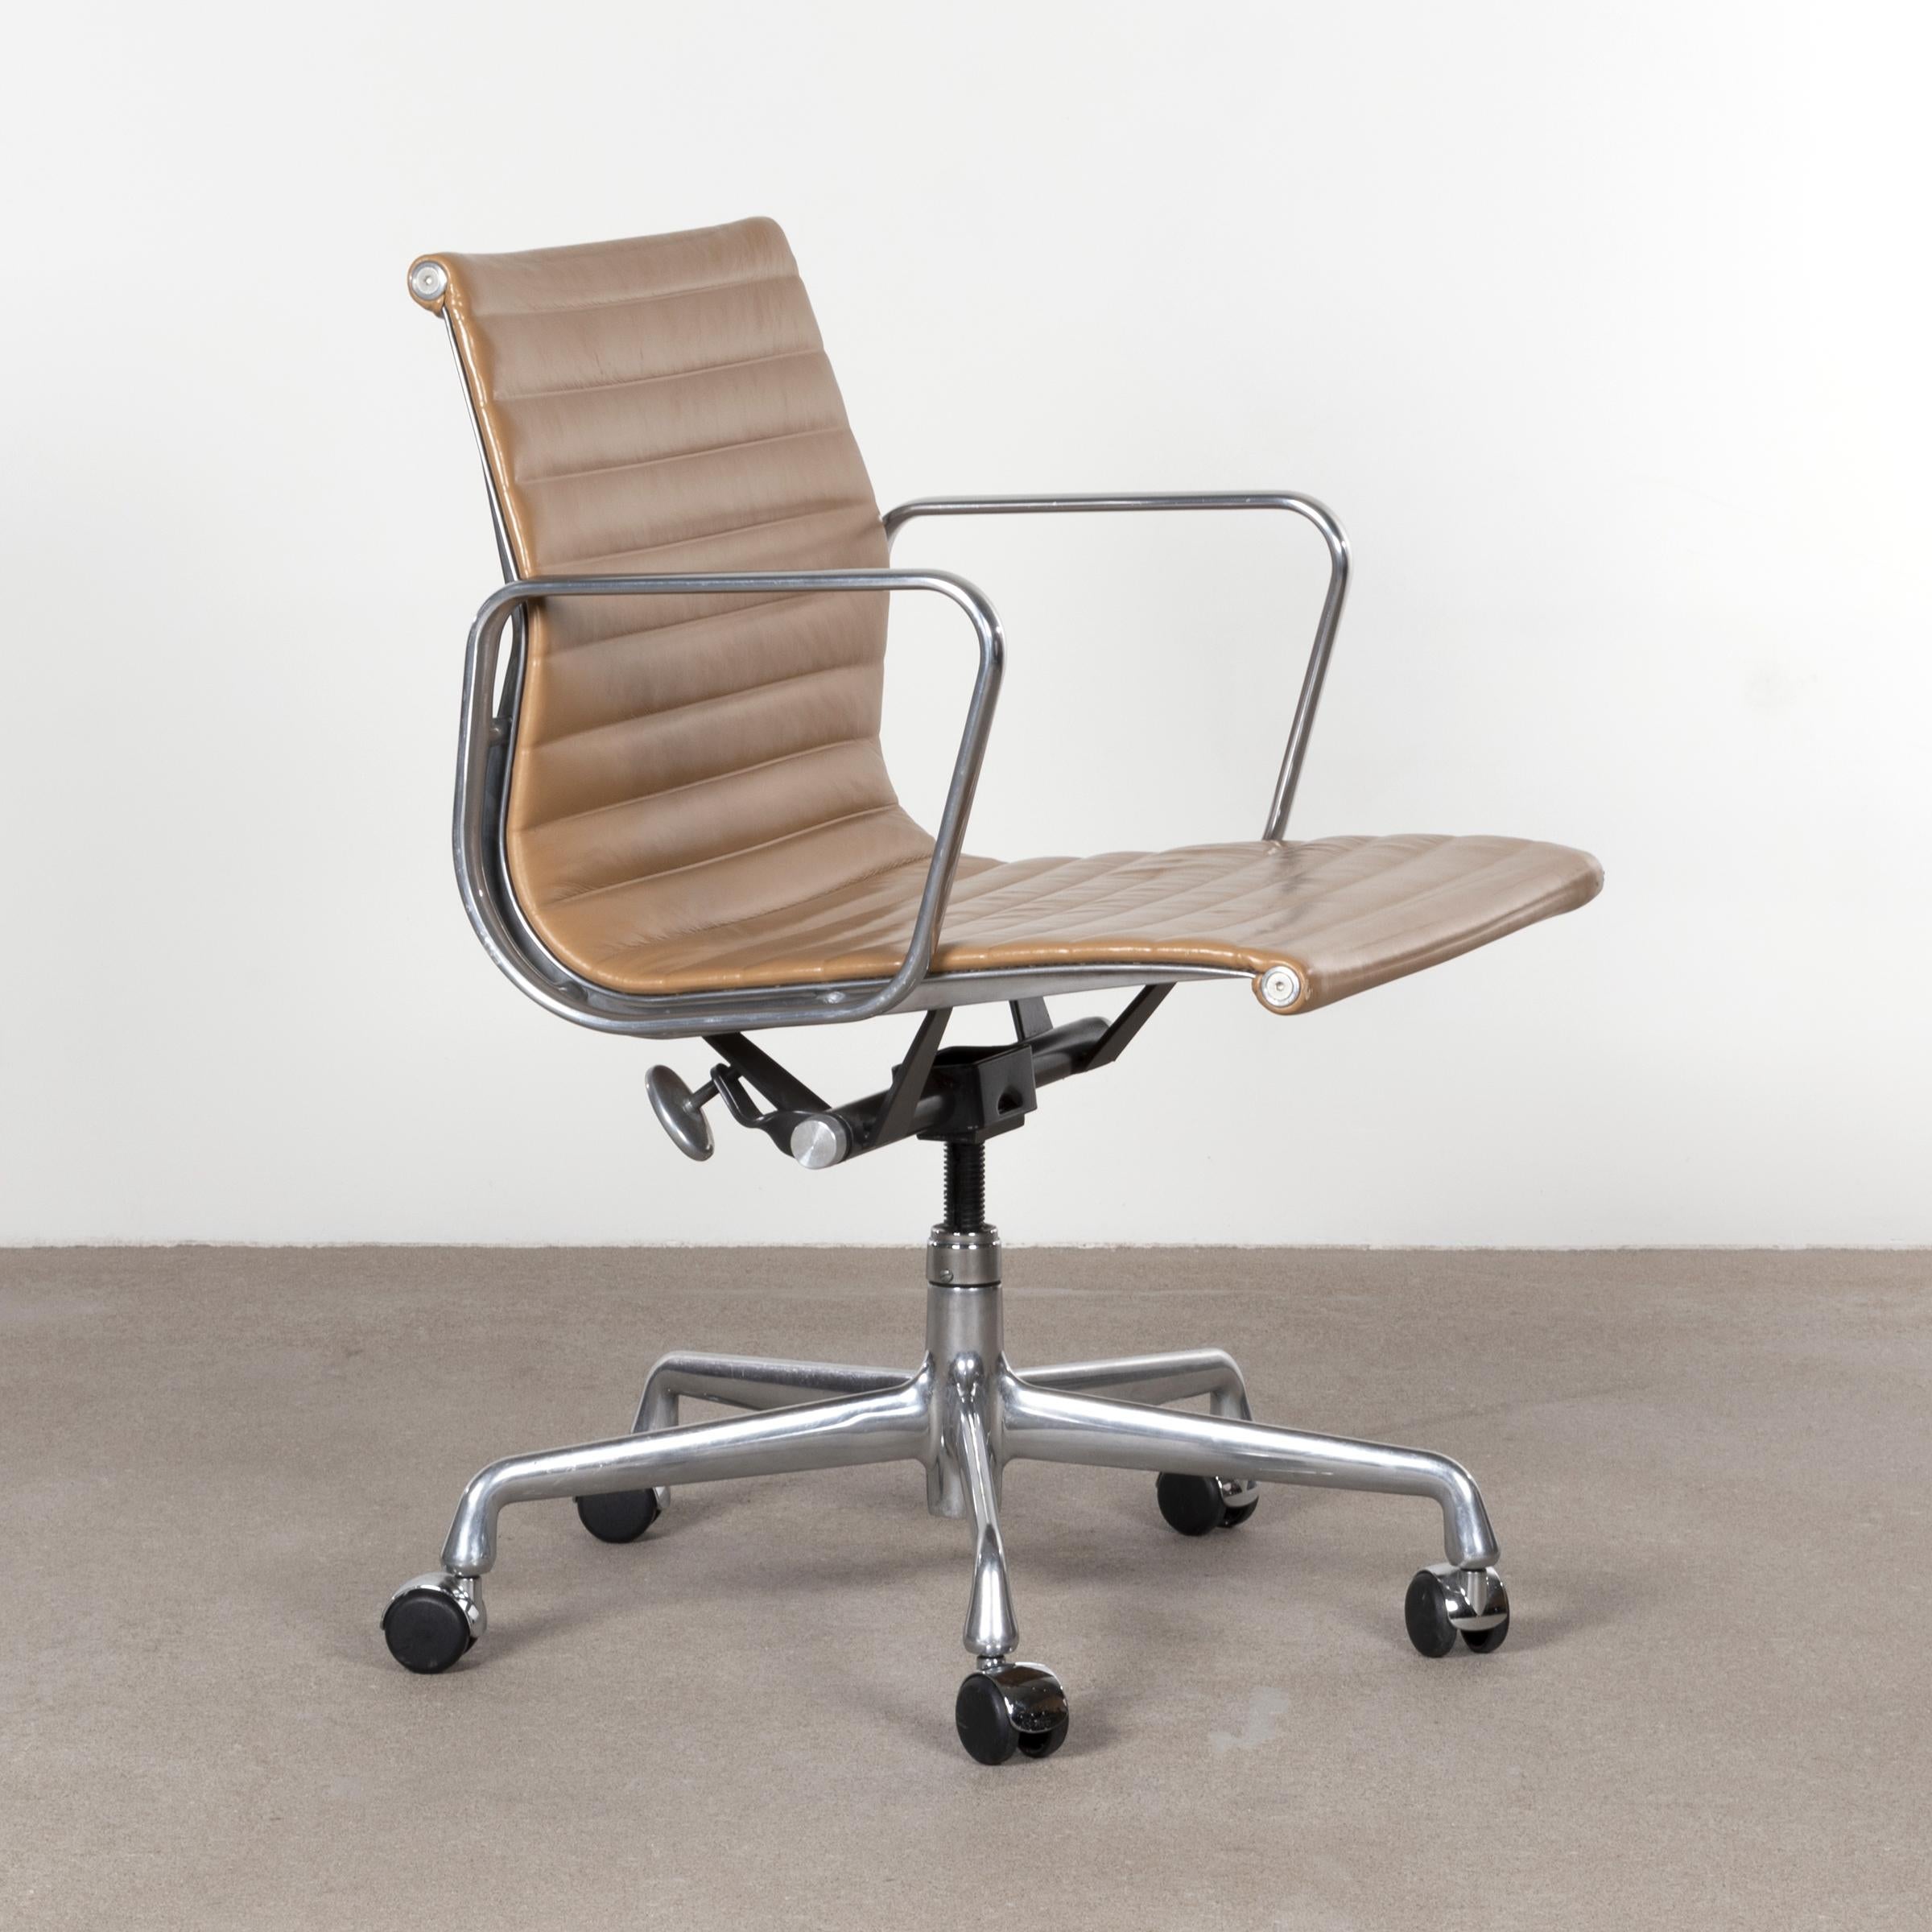 Mid-Century Modern Eames Management Office Chair in Cognac Leather for Herman Miller, USA